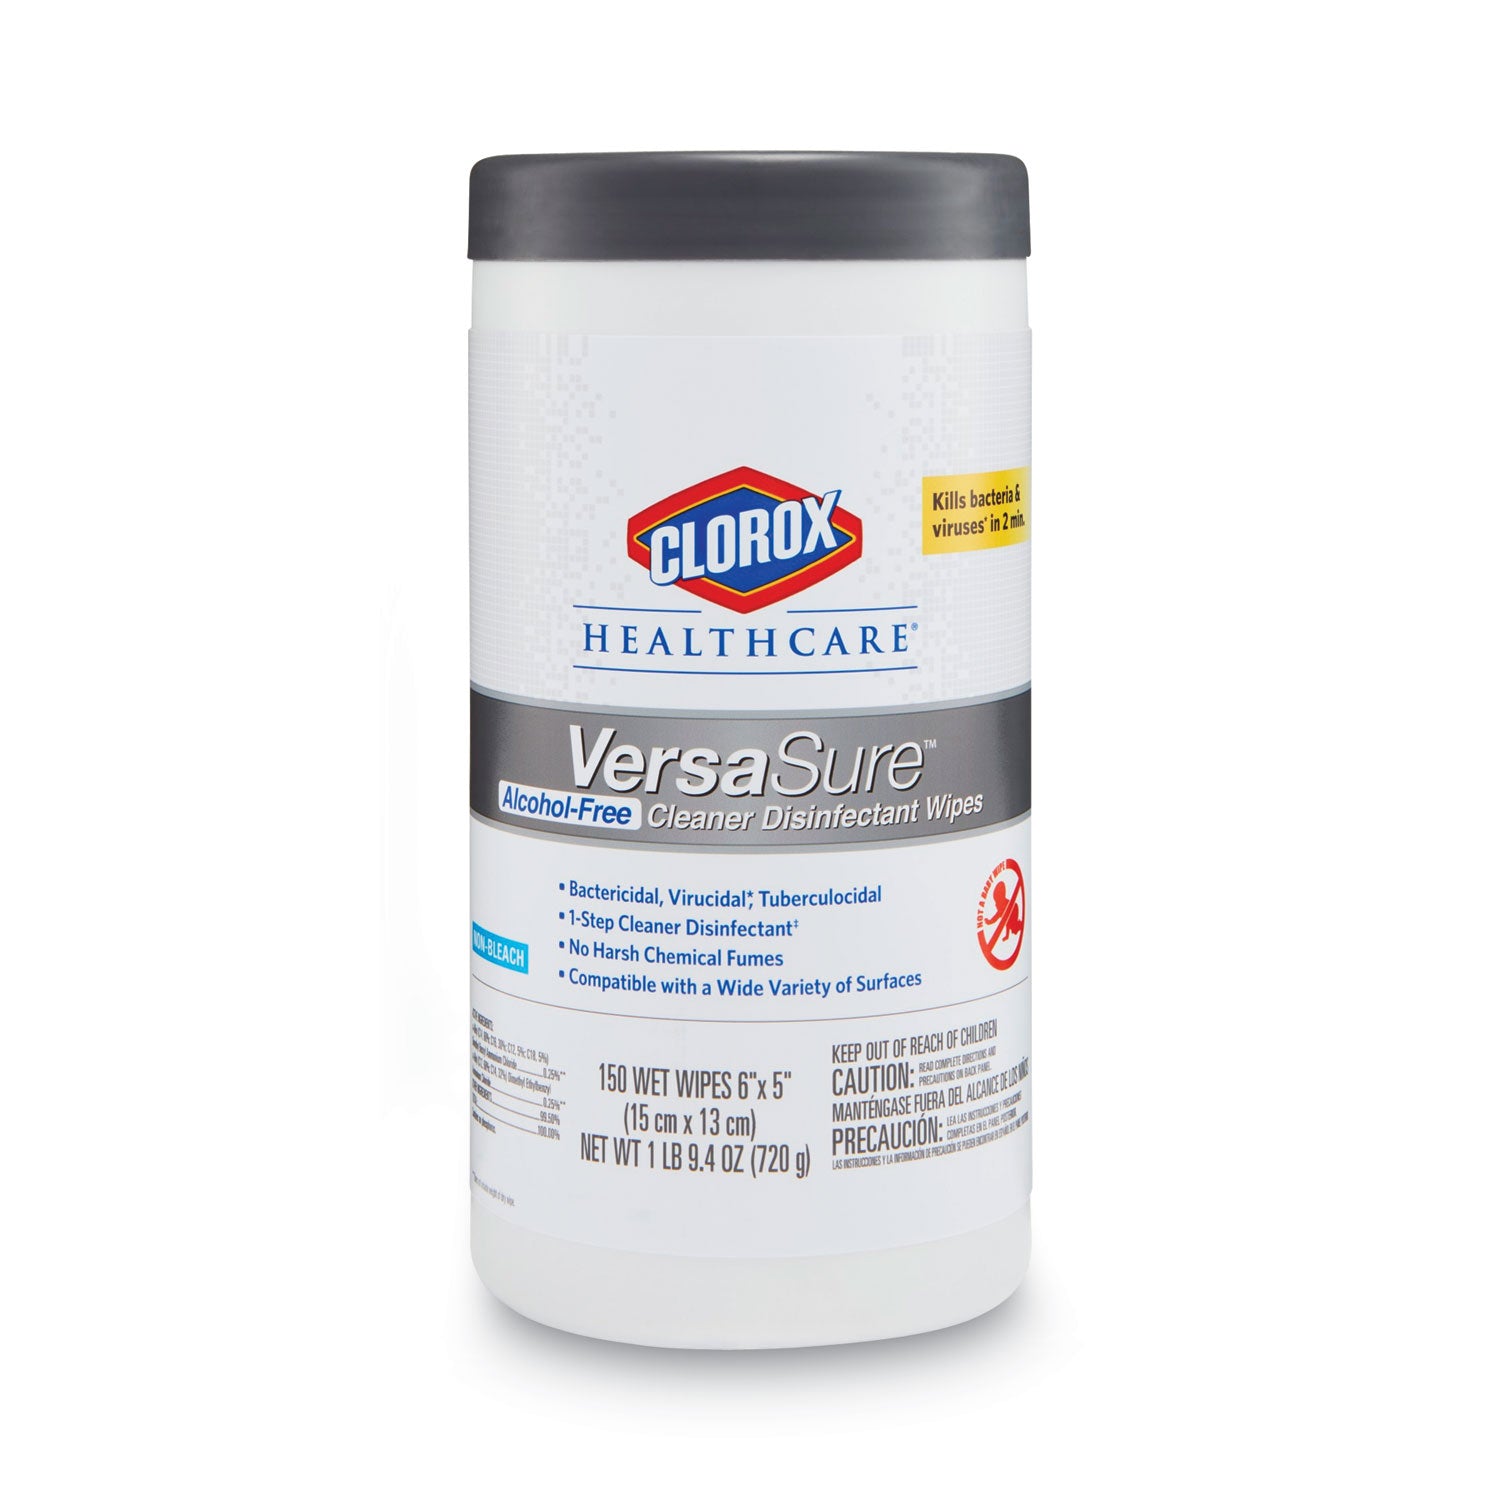 versasure-cleaner-disinfectant-wipes-1-ply-675-x-8-fragranced-white-150-canister-6-canisters-carton_clo31758 - 2